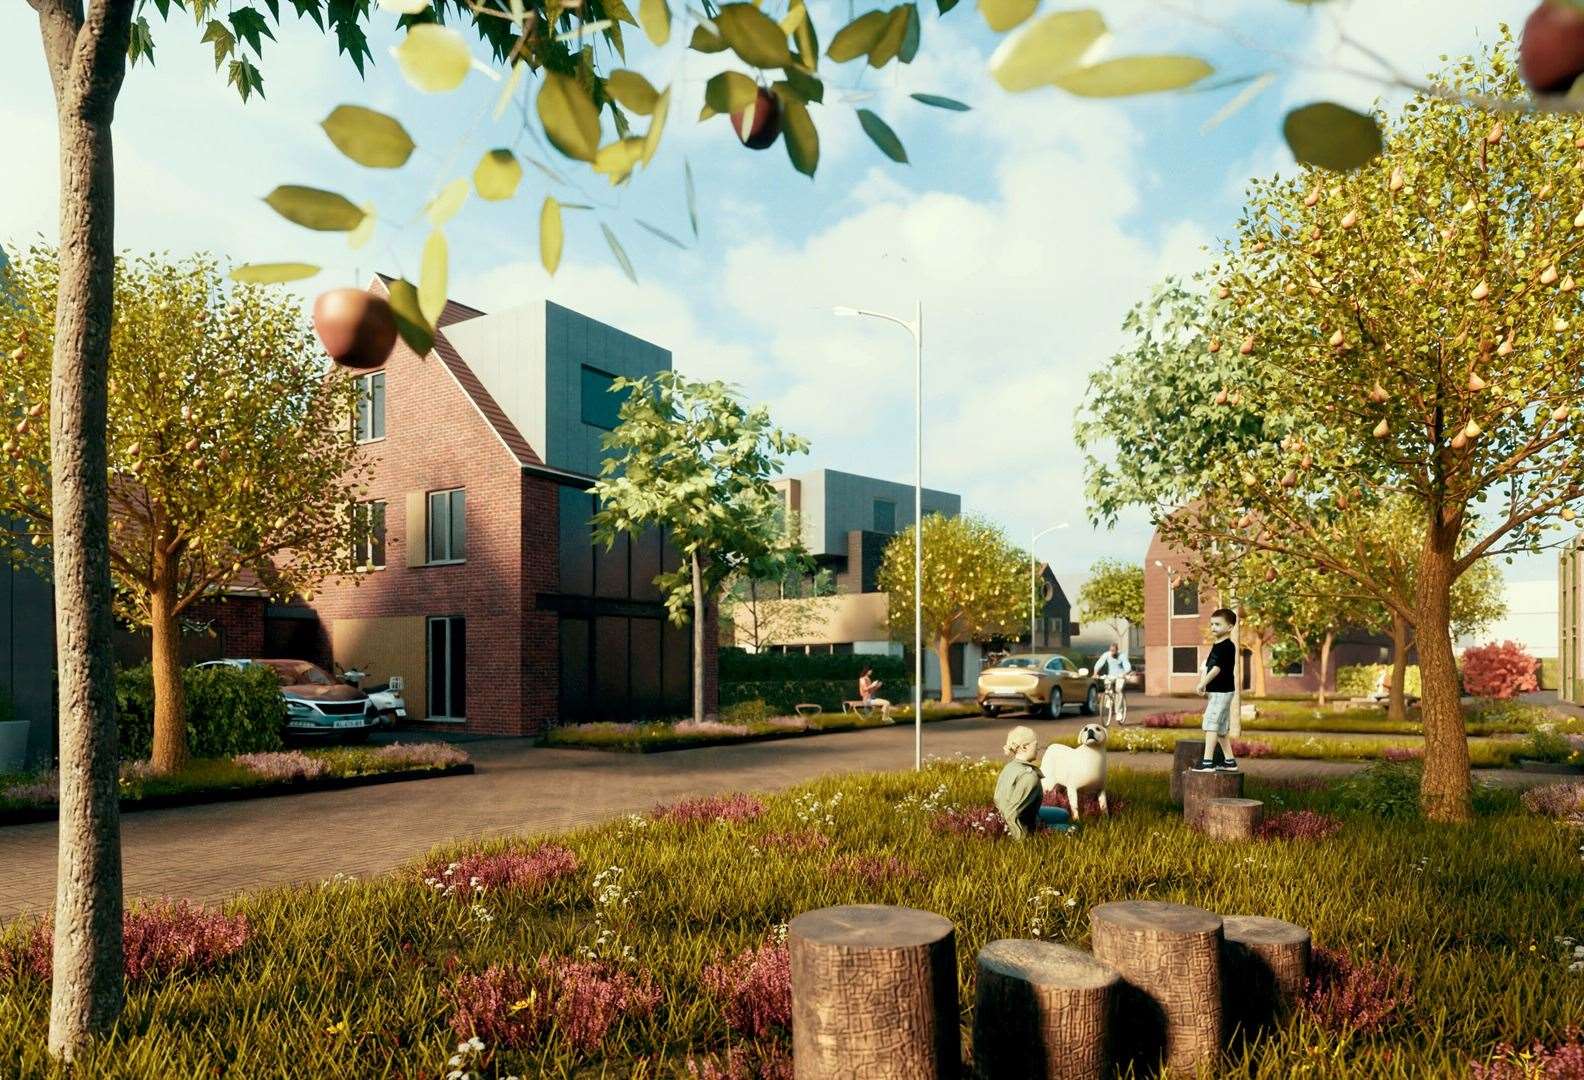 How the self-build Orchard Farm estate in Kennington could look. Picture: Orchard Farm Kent Ltd